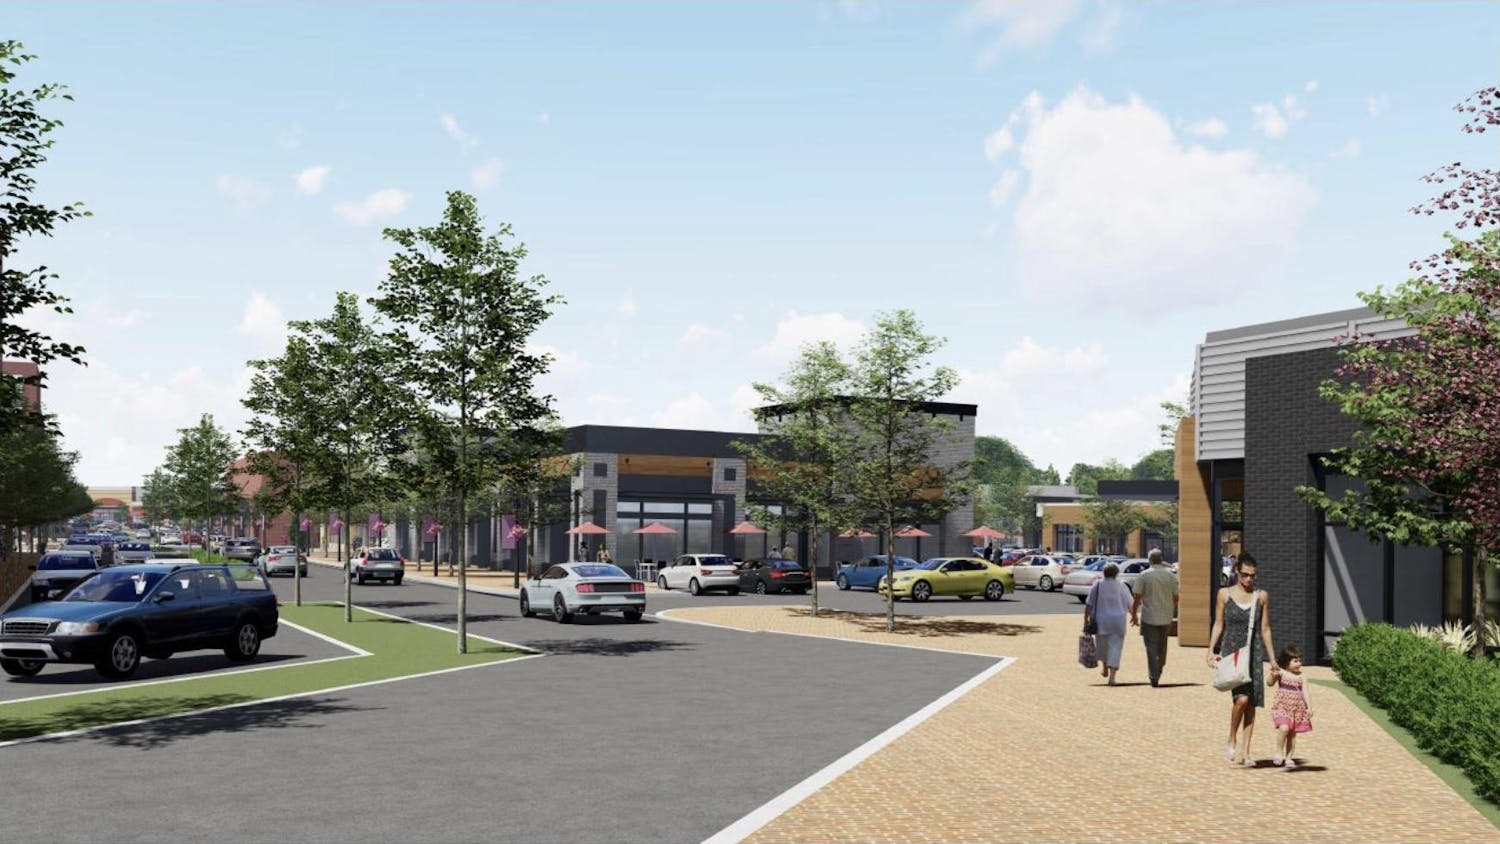 A rendering of the plans for the redevelopment of Richland Mall in Forest Acres, showing an open-air shopping center instead of a traditional mall format. Richland Mall officially closed in 2023, but the mall's interior has been closed to the public since 2022.